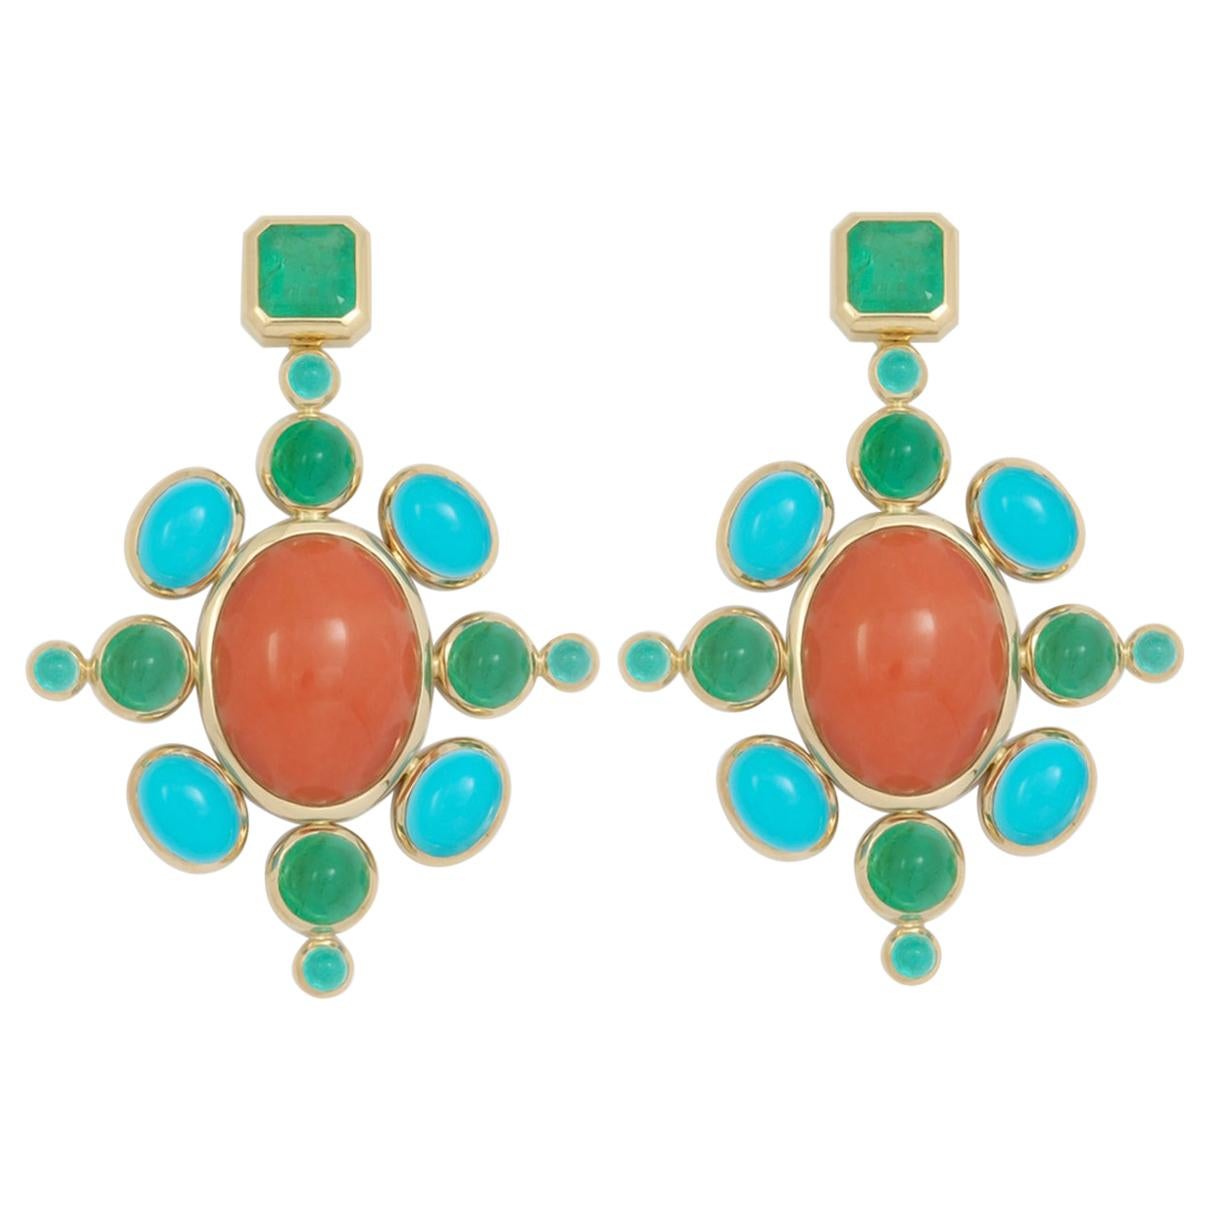 Middle Ages Earrings with Corals, Emeralds, Turquoises, and Paraiba Tourmalines